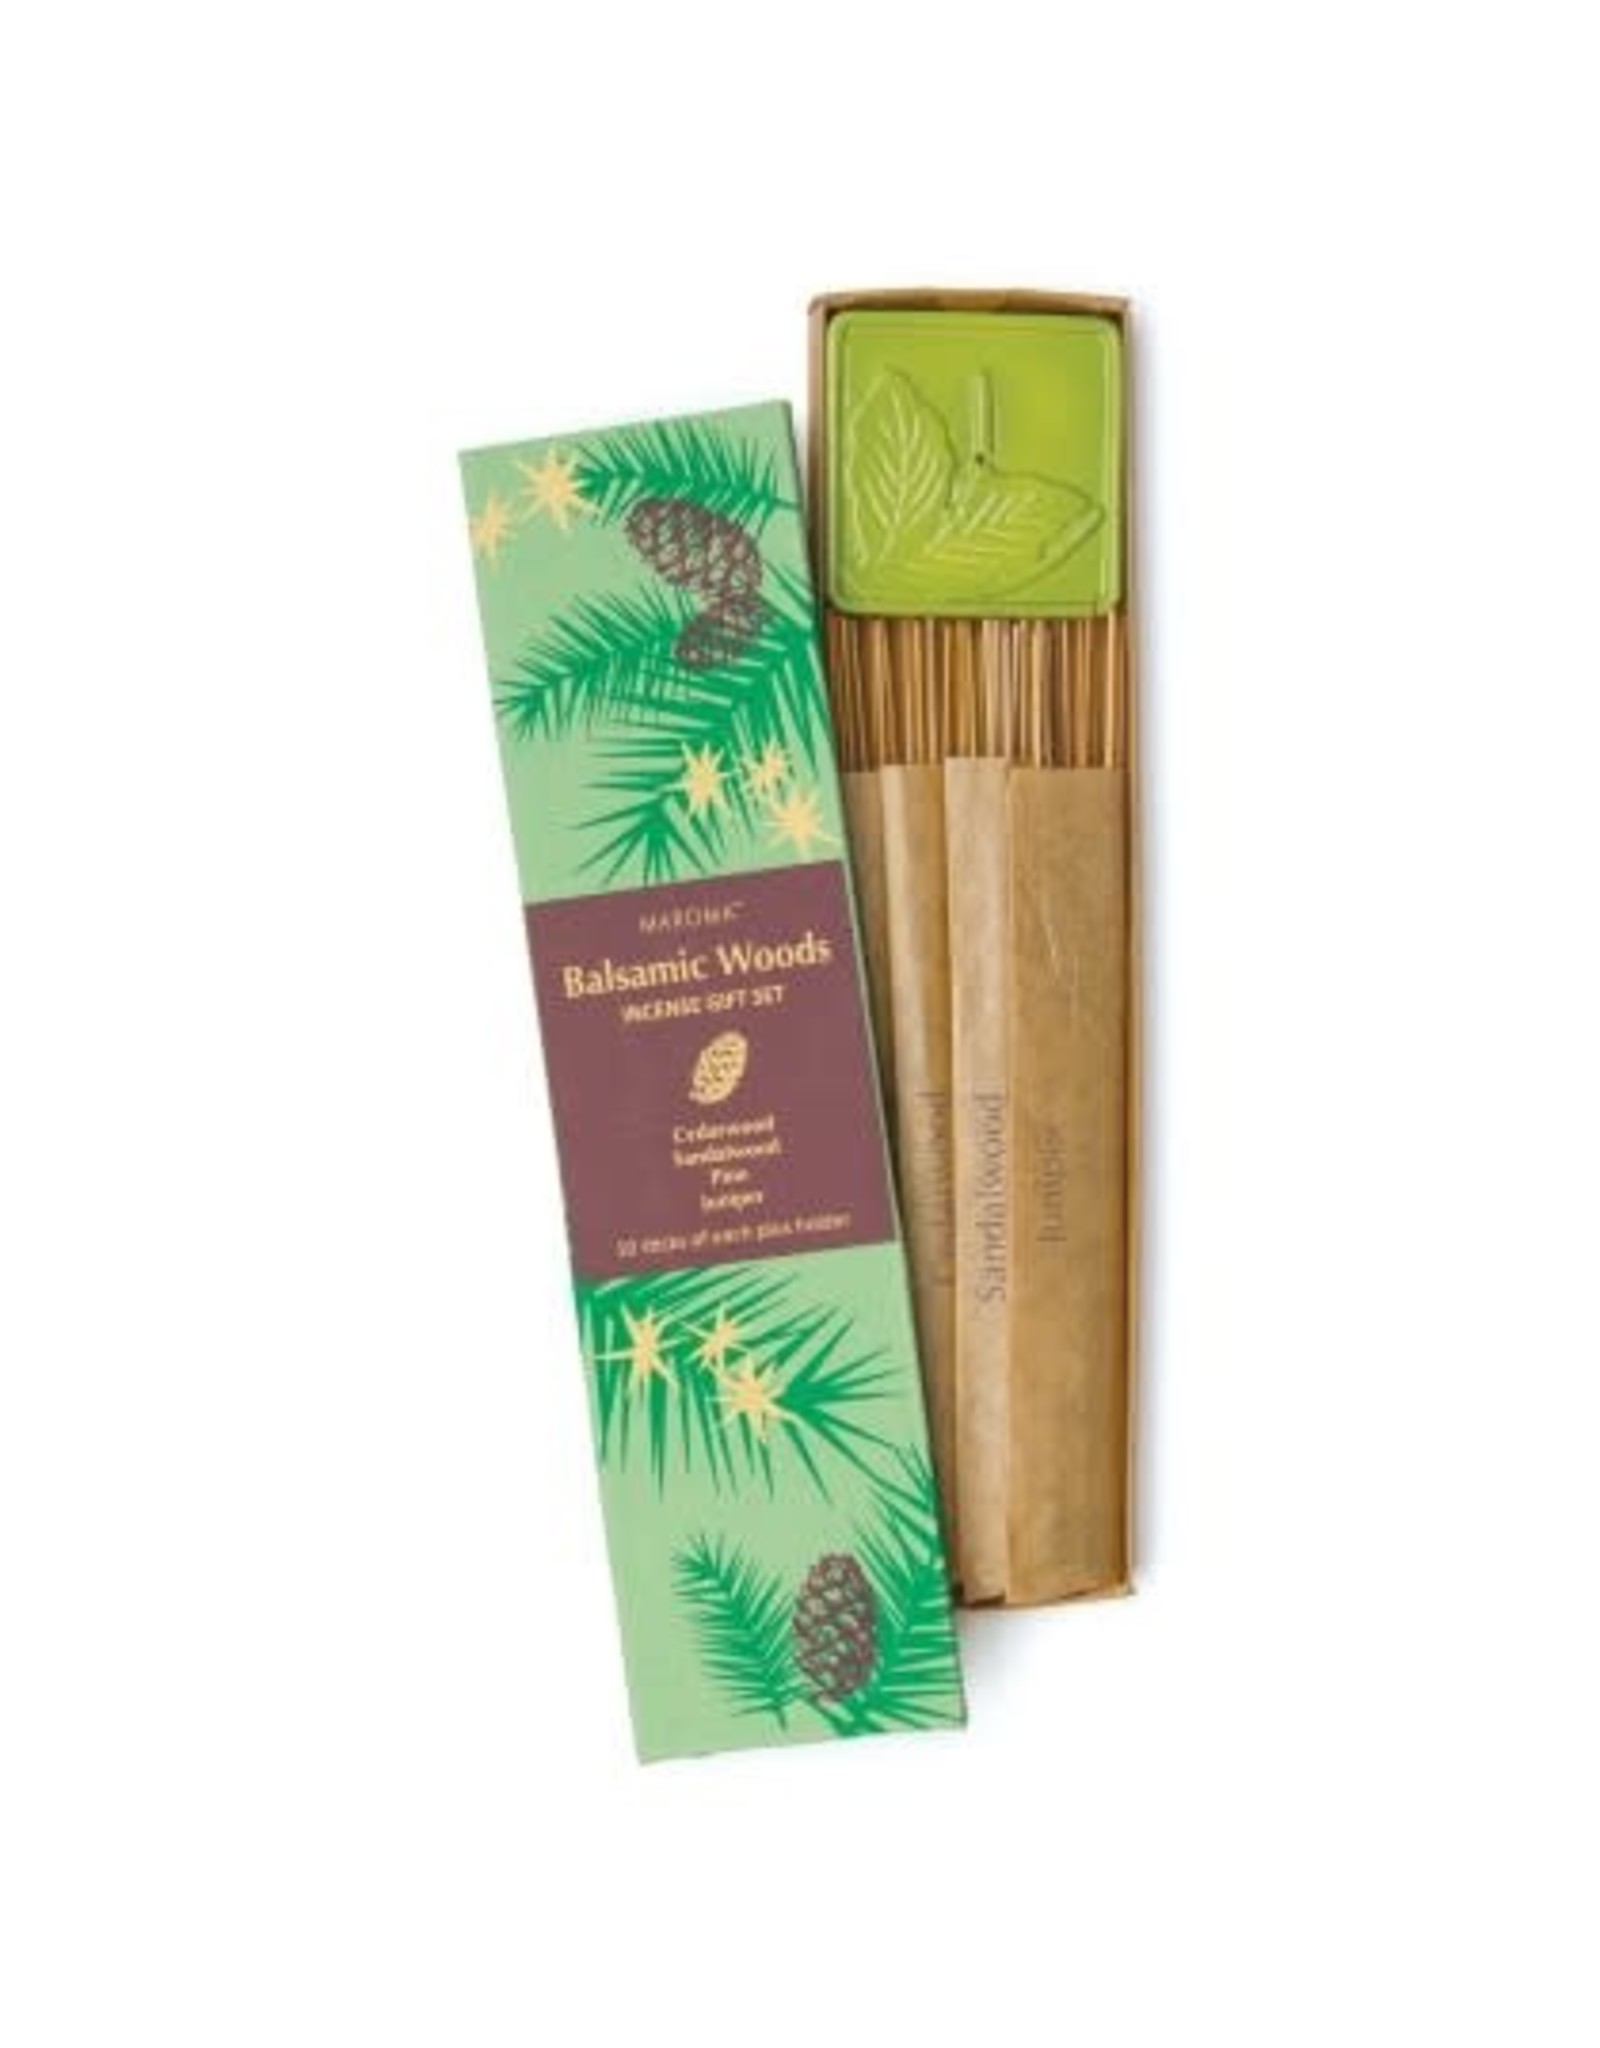 Trade roots Incense Gift Set, India,